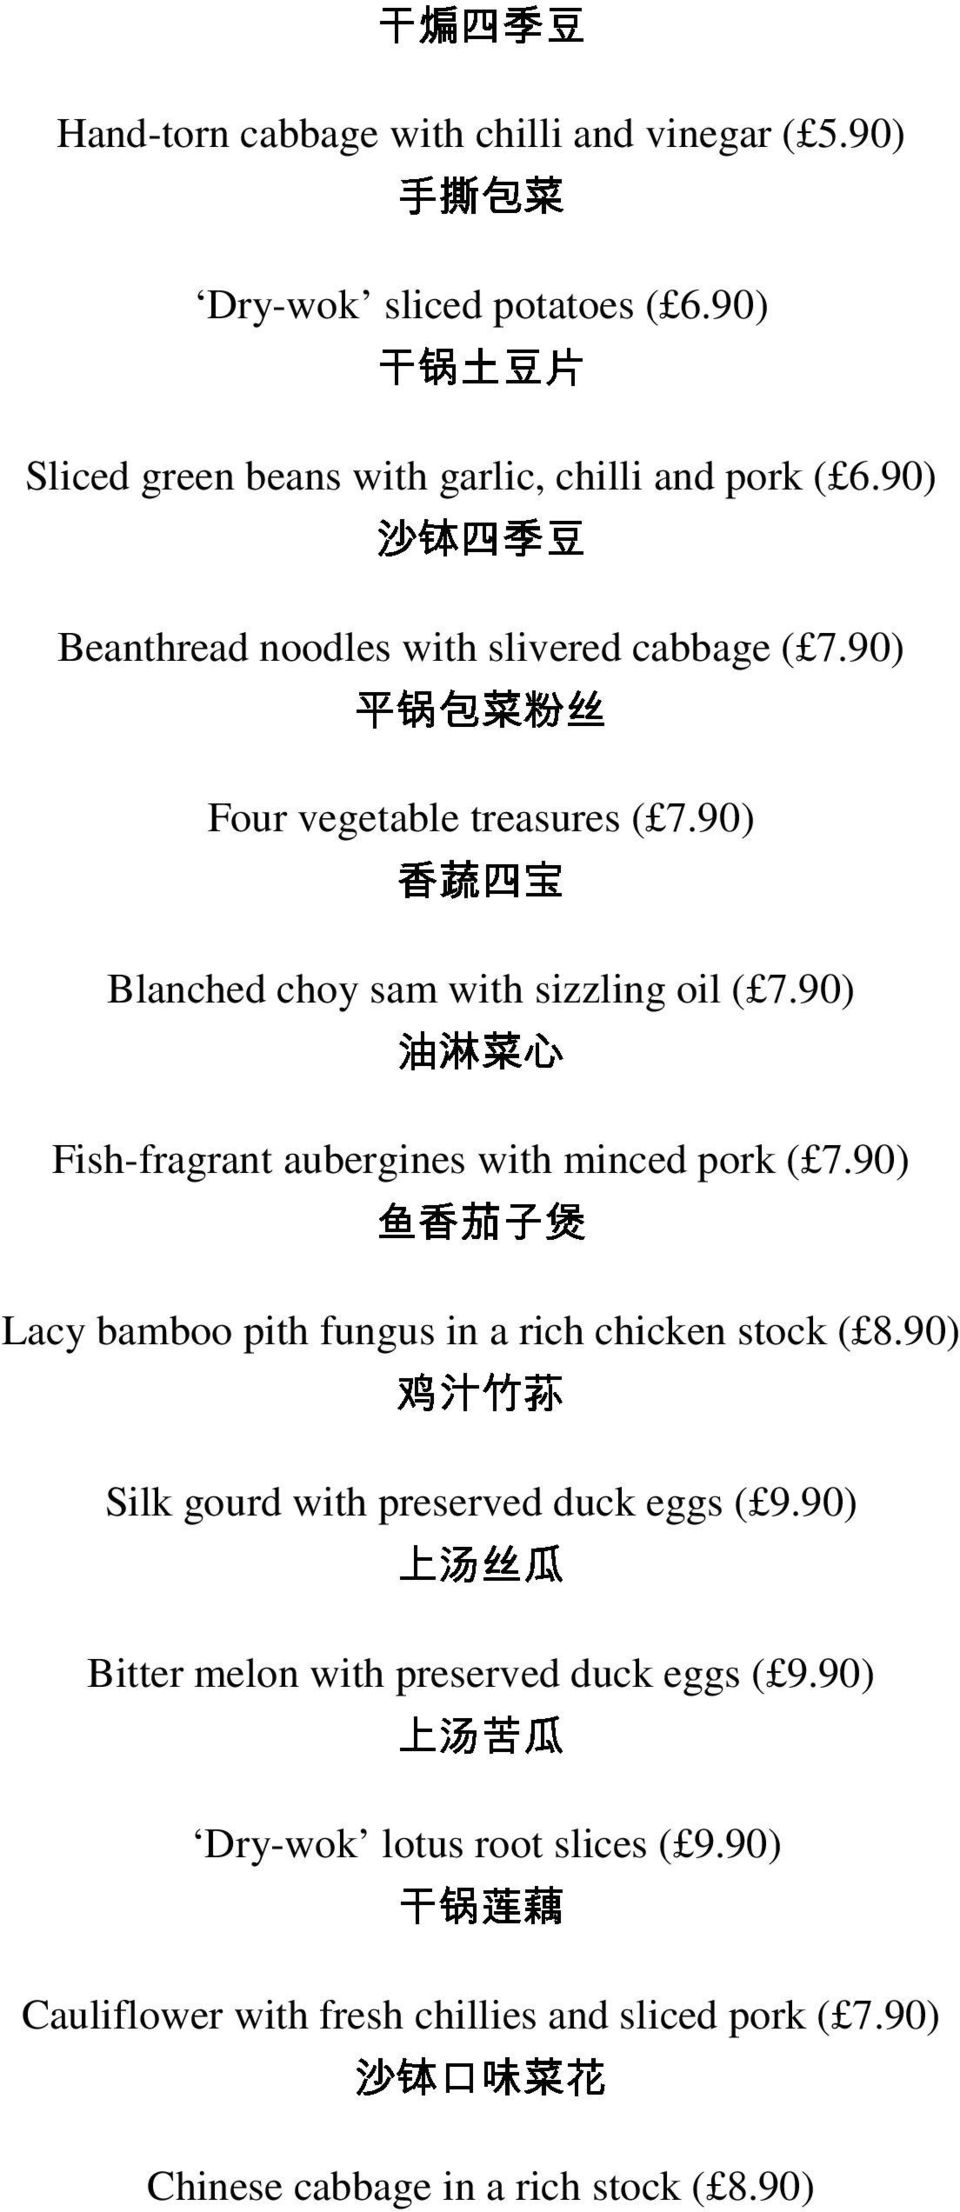 90) Blanched choy sam with sizzling oil ( 7.90) Fish-fragrant aubergines with minced pork ( 7.90) Lacy bamboo pith fungus in a rich chicken stock ( 8.